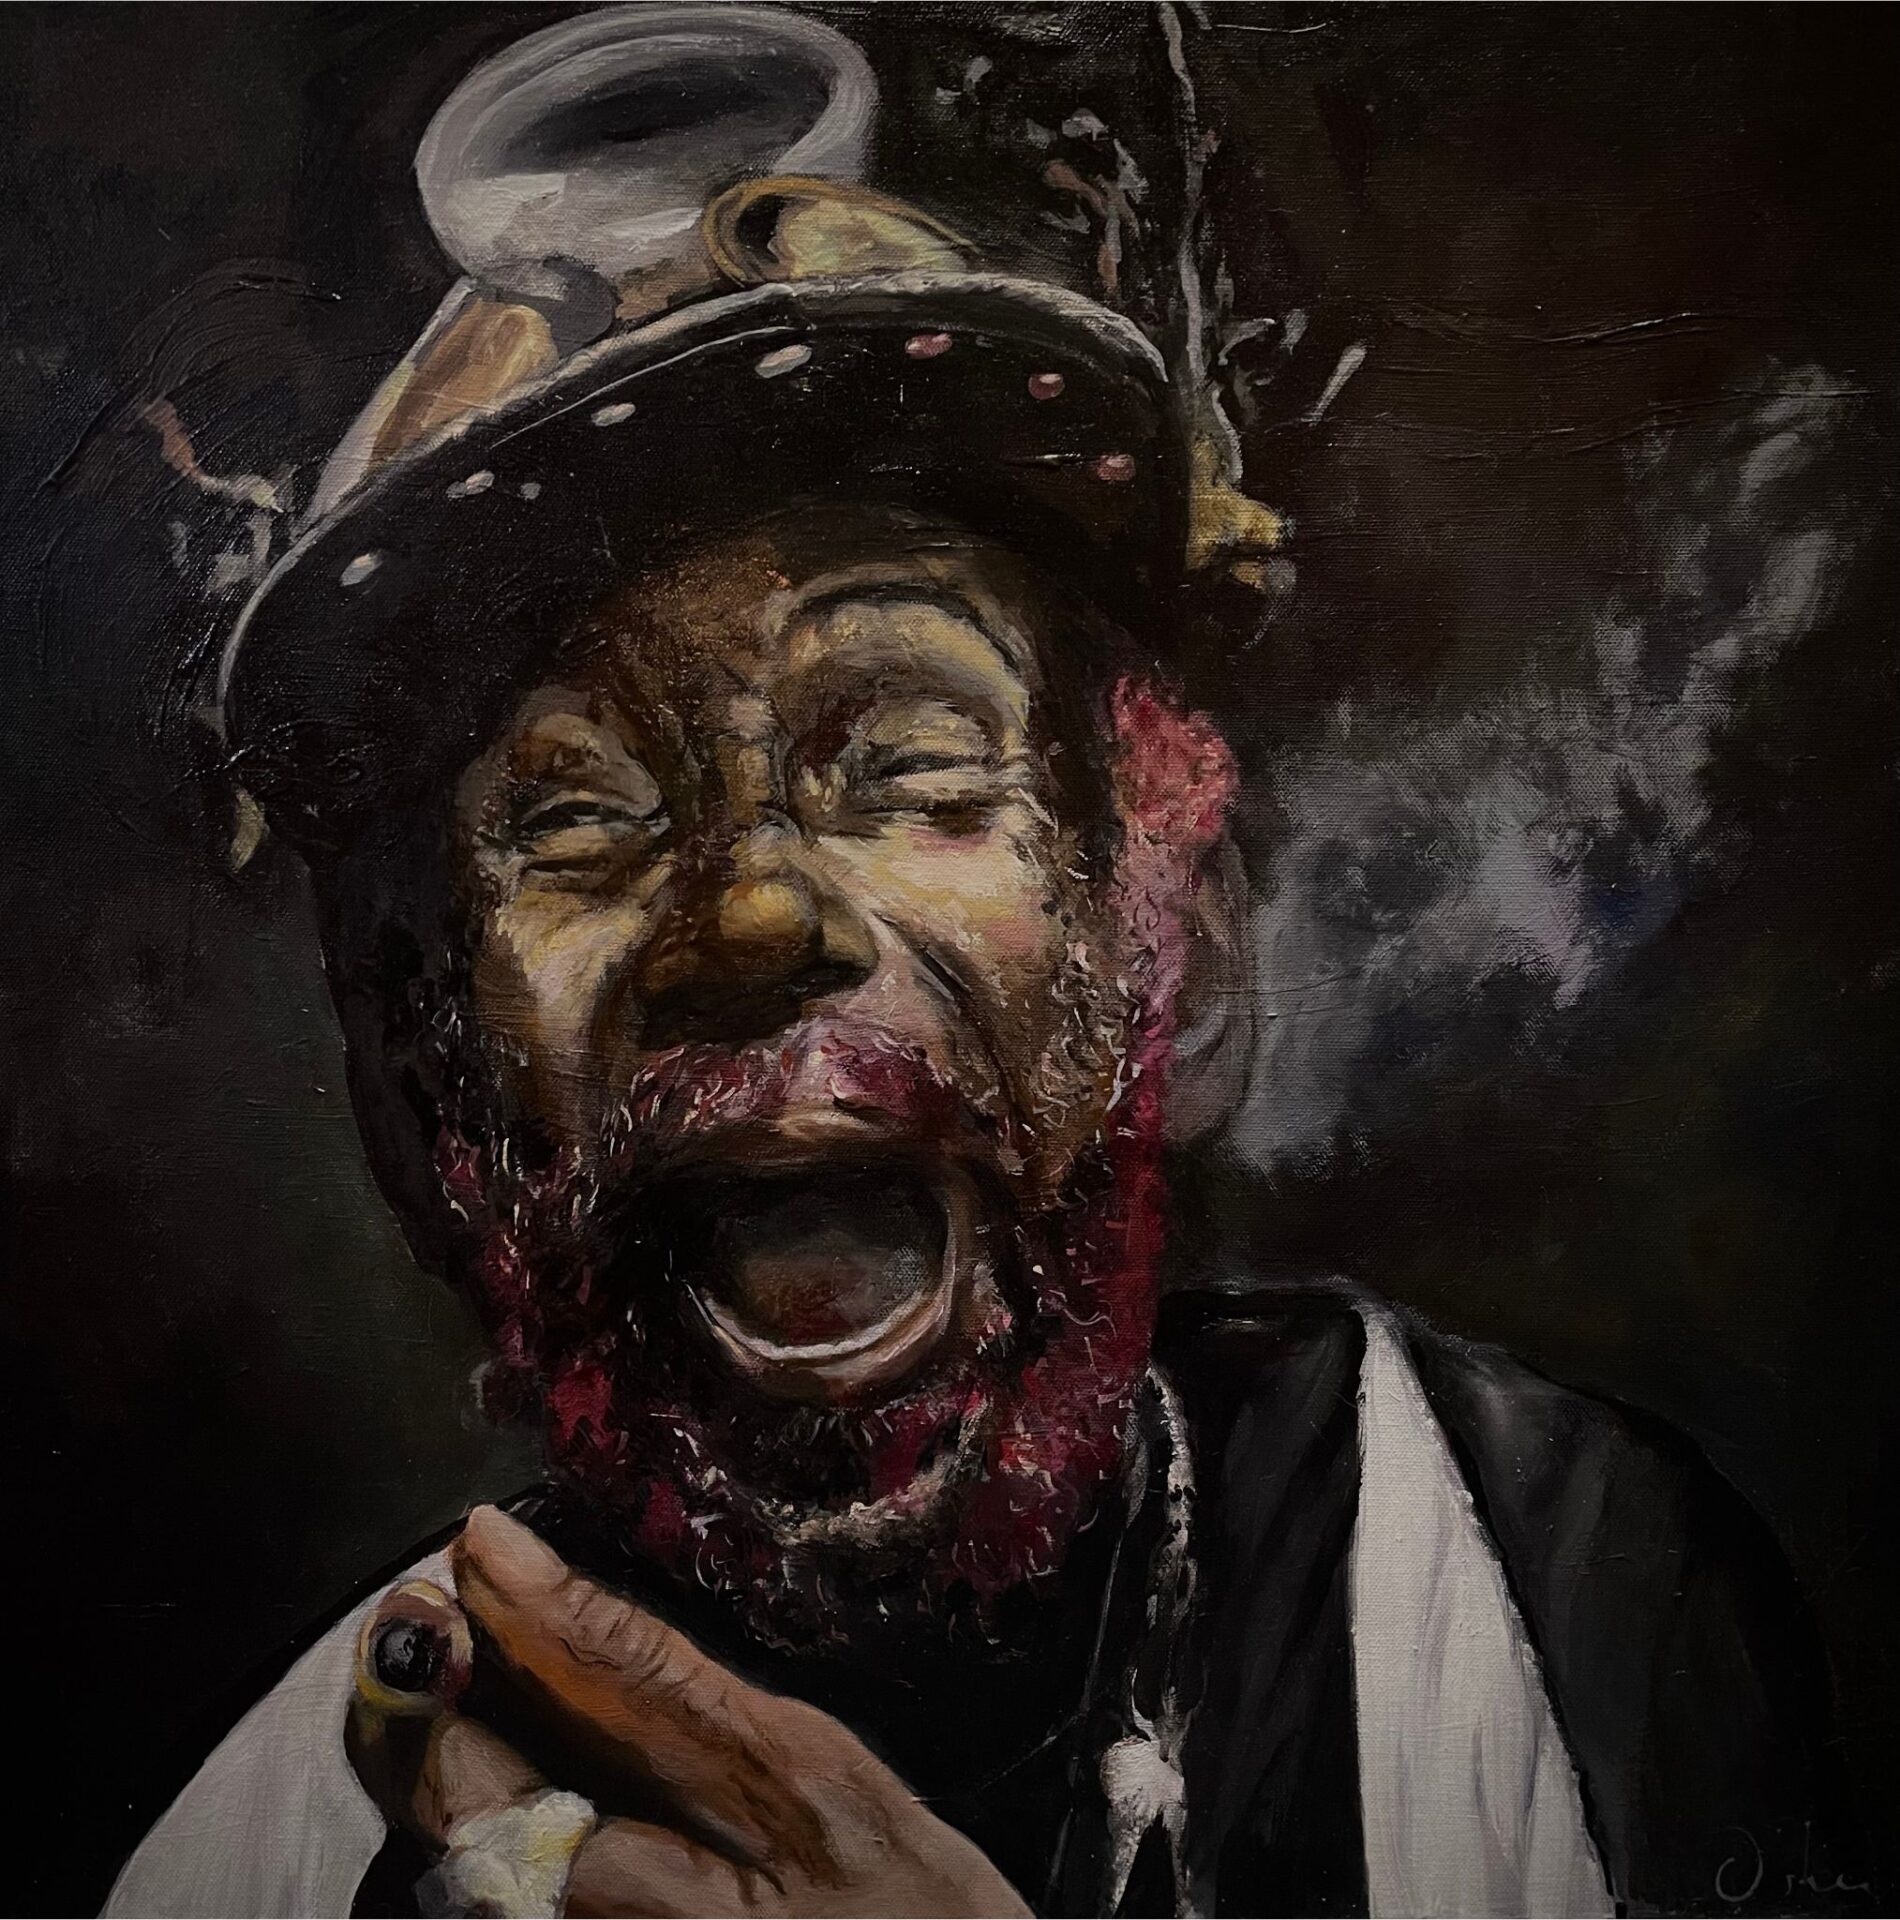 Lee Scratch Perry was one of my favourite commissions.